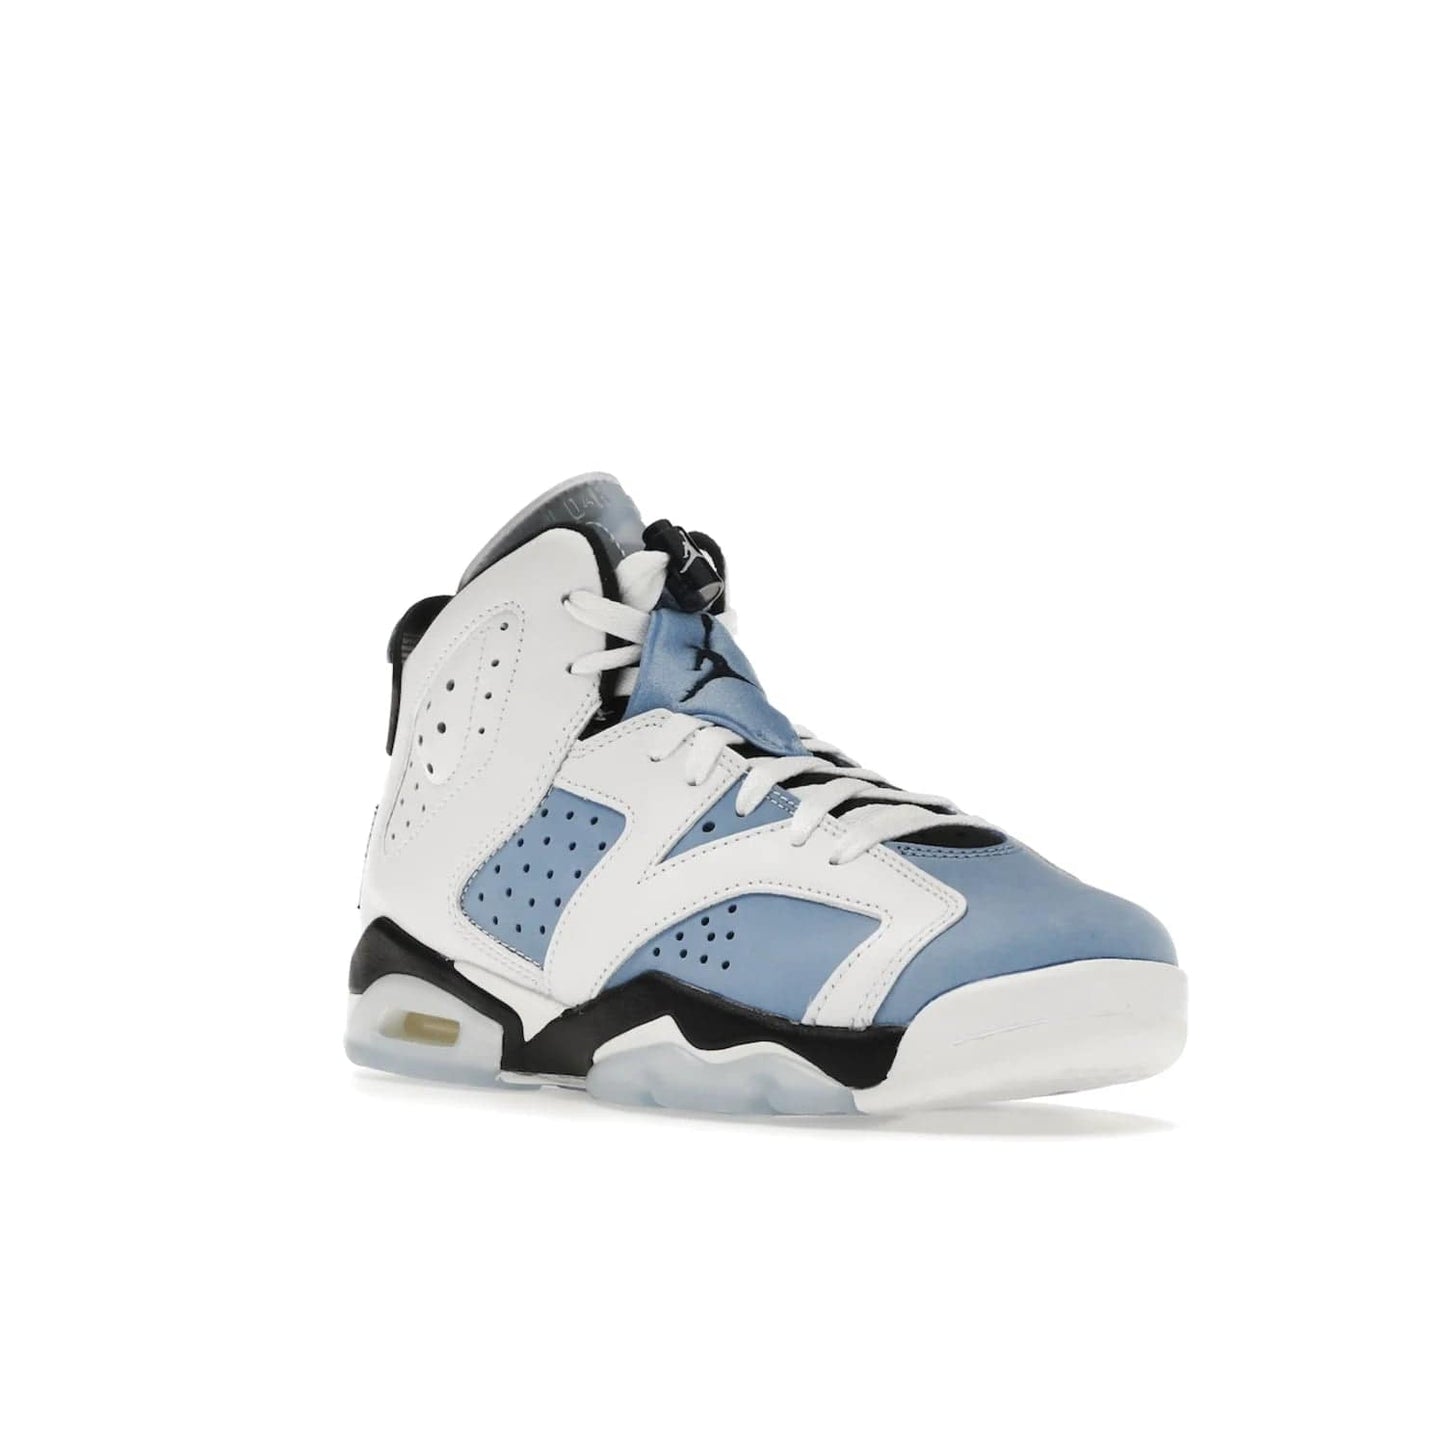 Jordan 6 Retro UNC White (GS) - Image 6 - Only at www.BallersClubKickz.com - Air Jordan 6 Retro UNC White GS: Michael Jordan alma mater, UNC Tar Heels, featuring colorway, nubuck, leather, Jumpman branding and a visible Air unit. Translucent blue/white outsole, perfect for completing sneaker rotation.